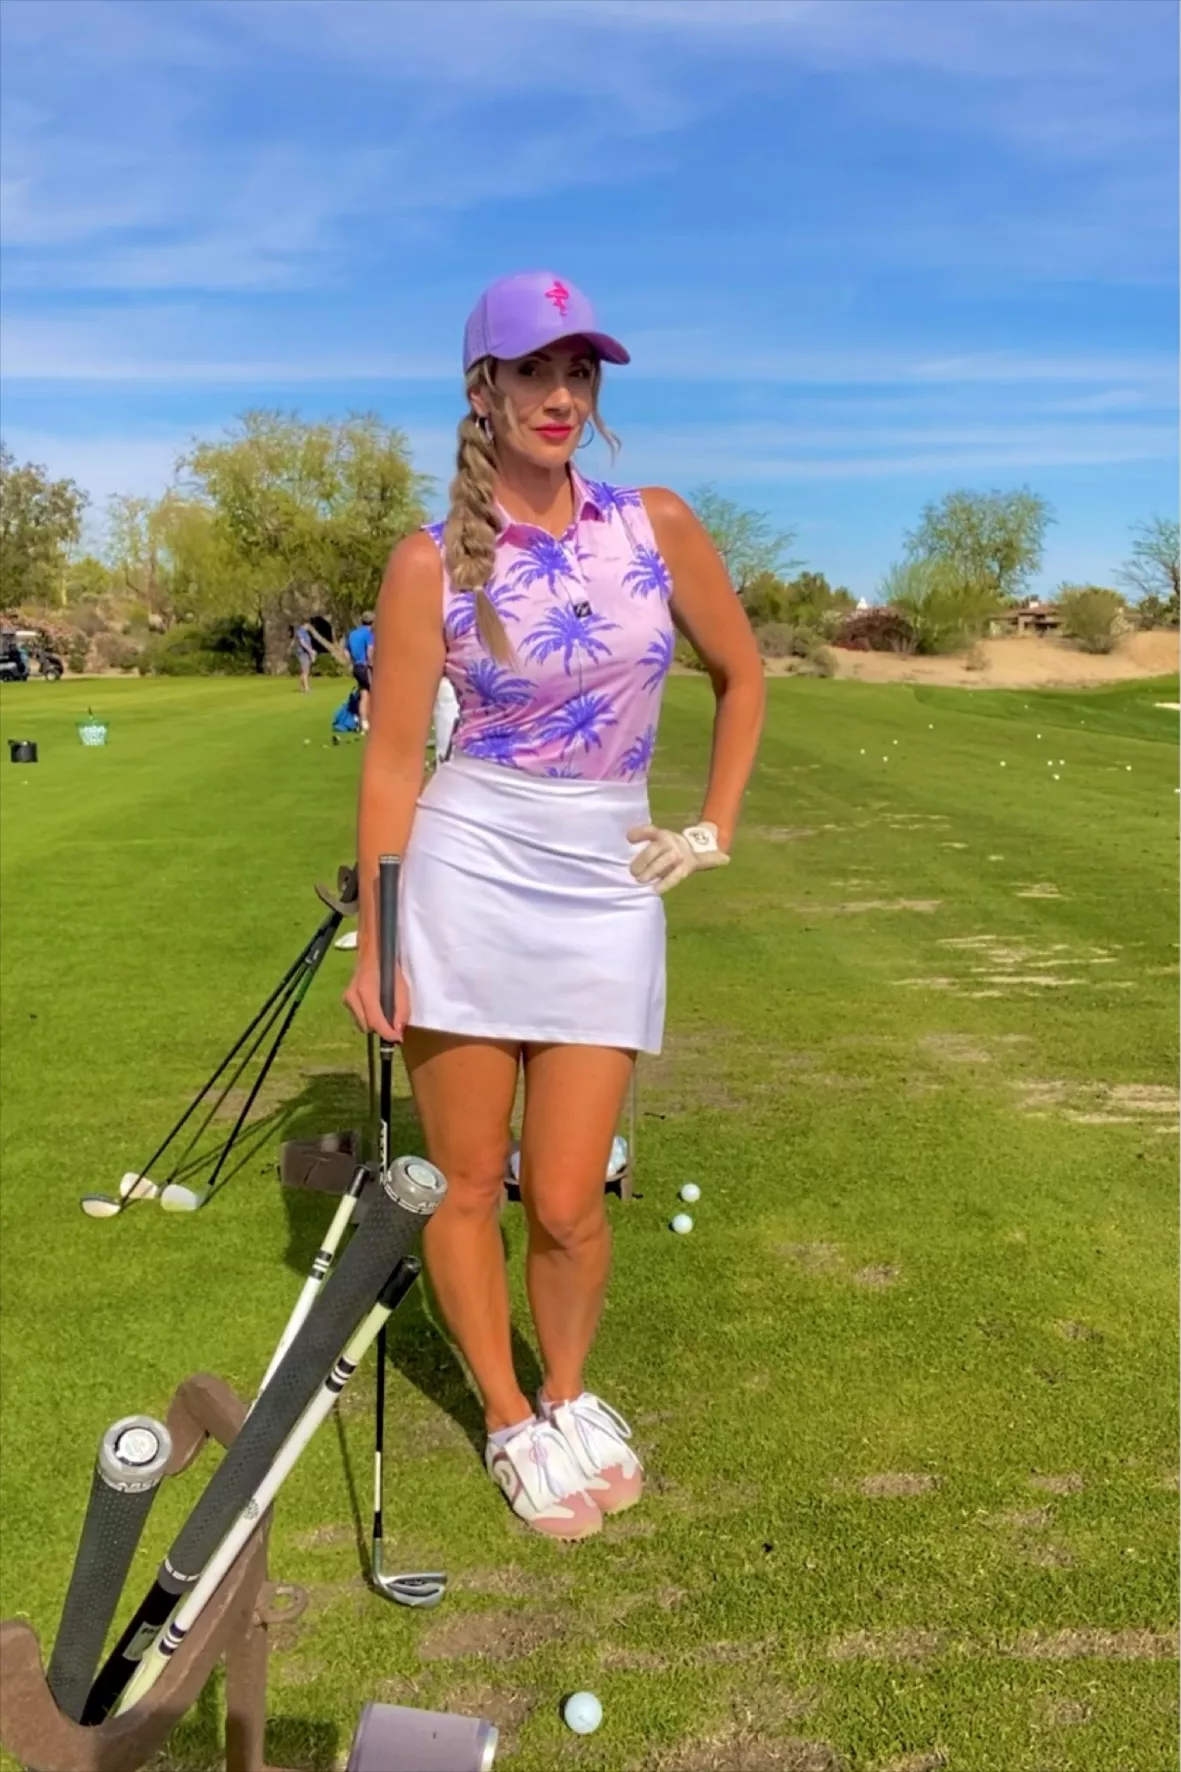 Women's Golf Clothes, Stylish Golf Dresses, and Cute Golf Outfits For ANY  Style!